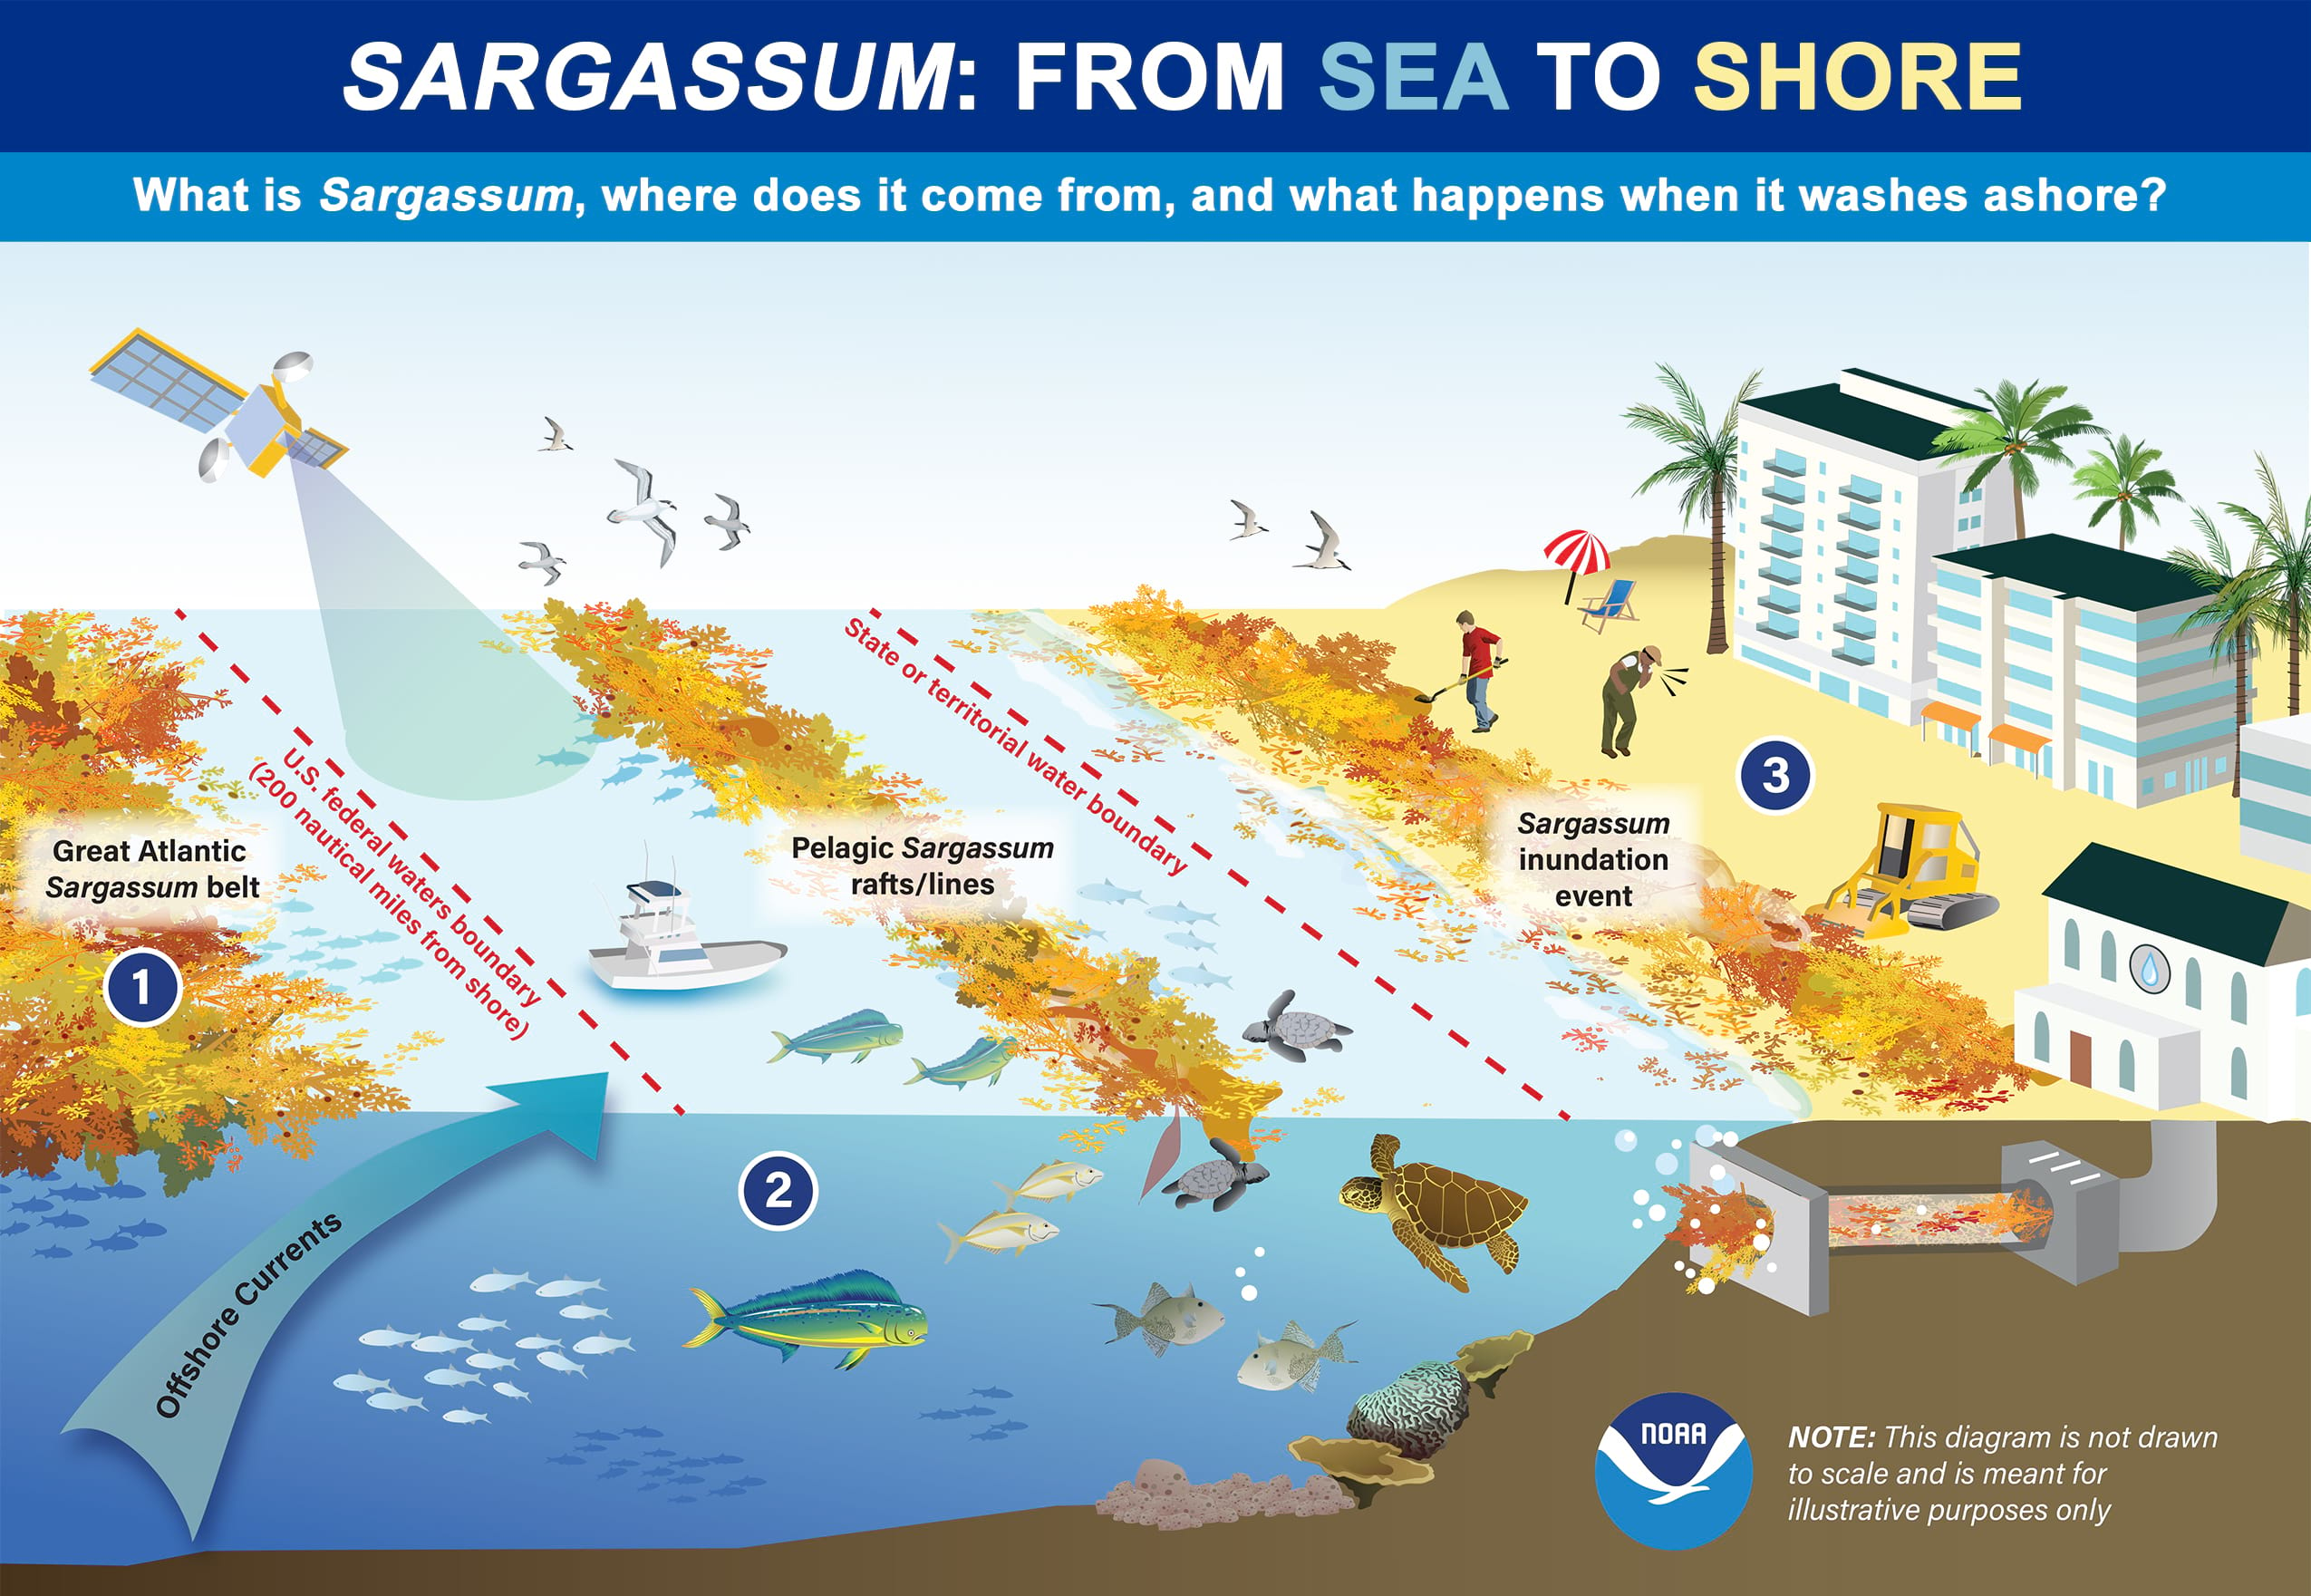 infographic showing the effects of Sargassum inundation events